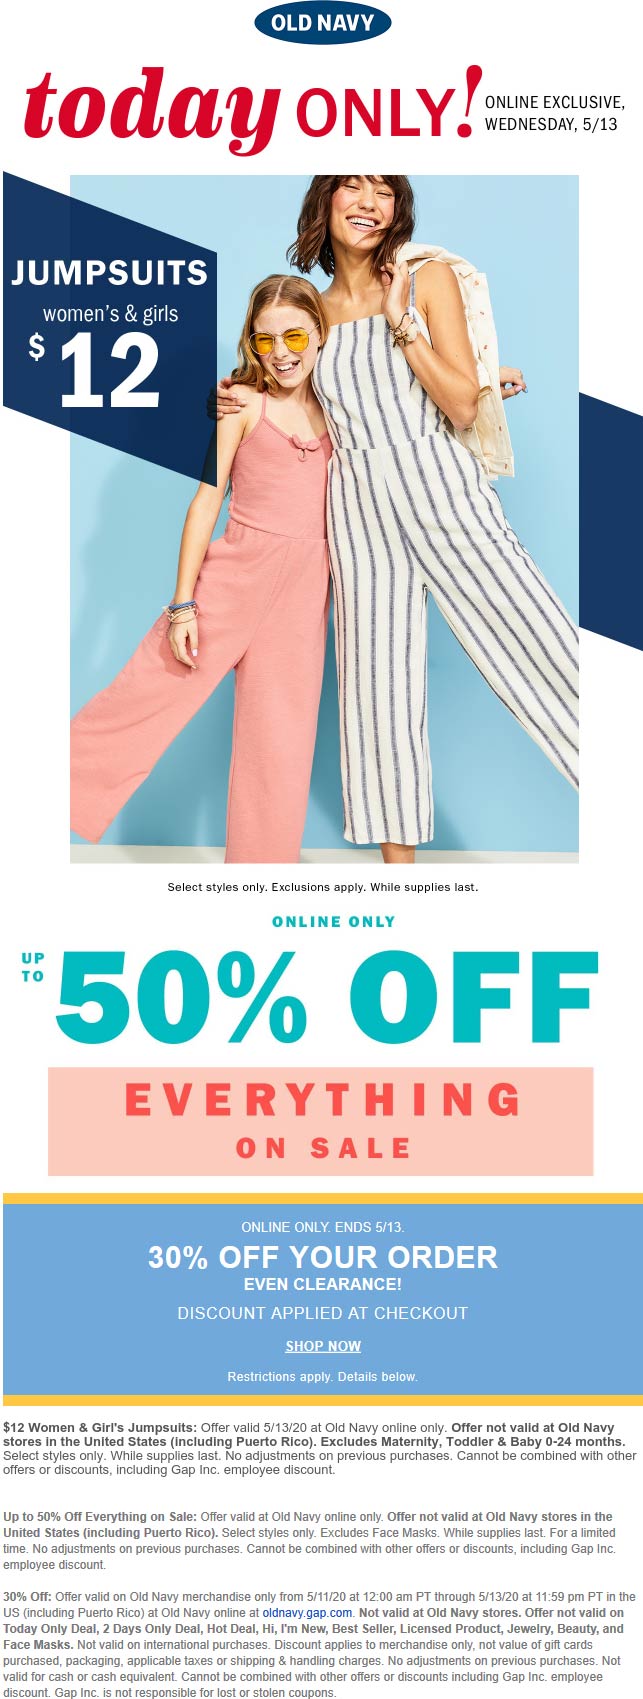 Old Navy stores Coupon  30% off everything today at Old Navy #oldnavy